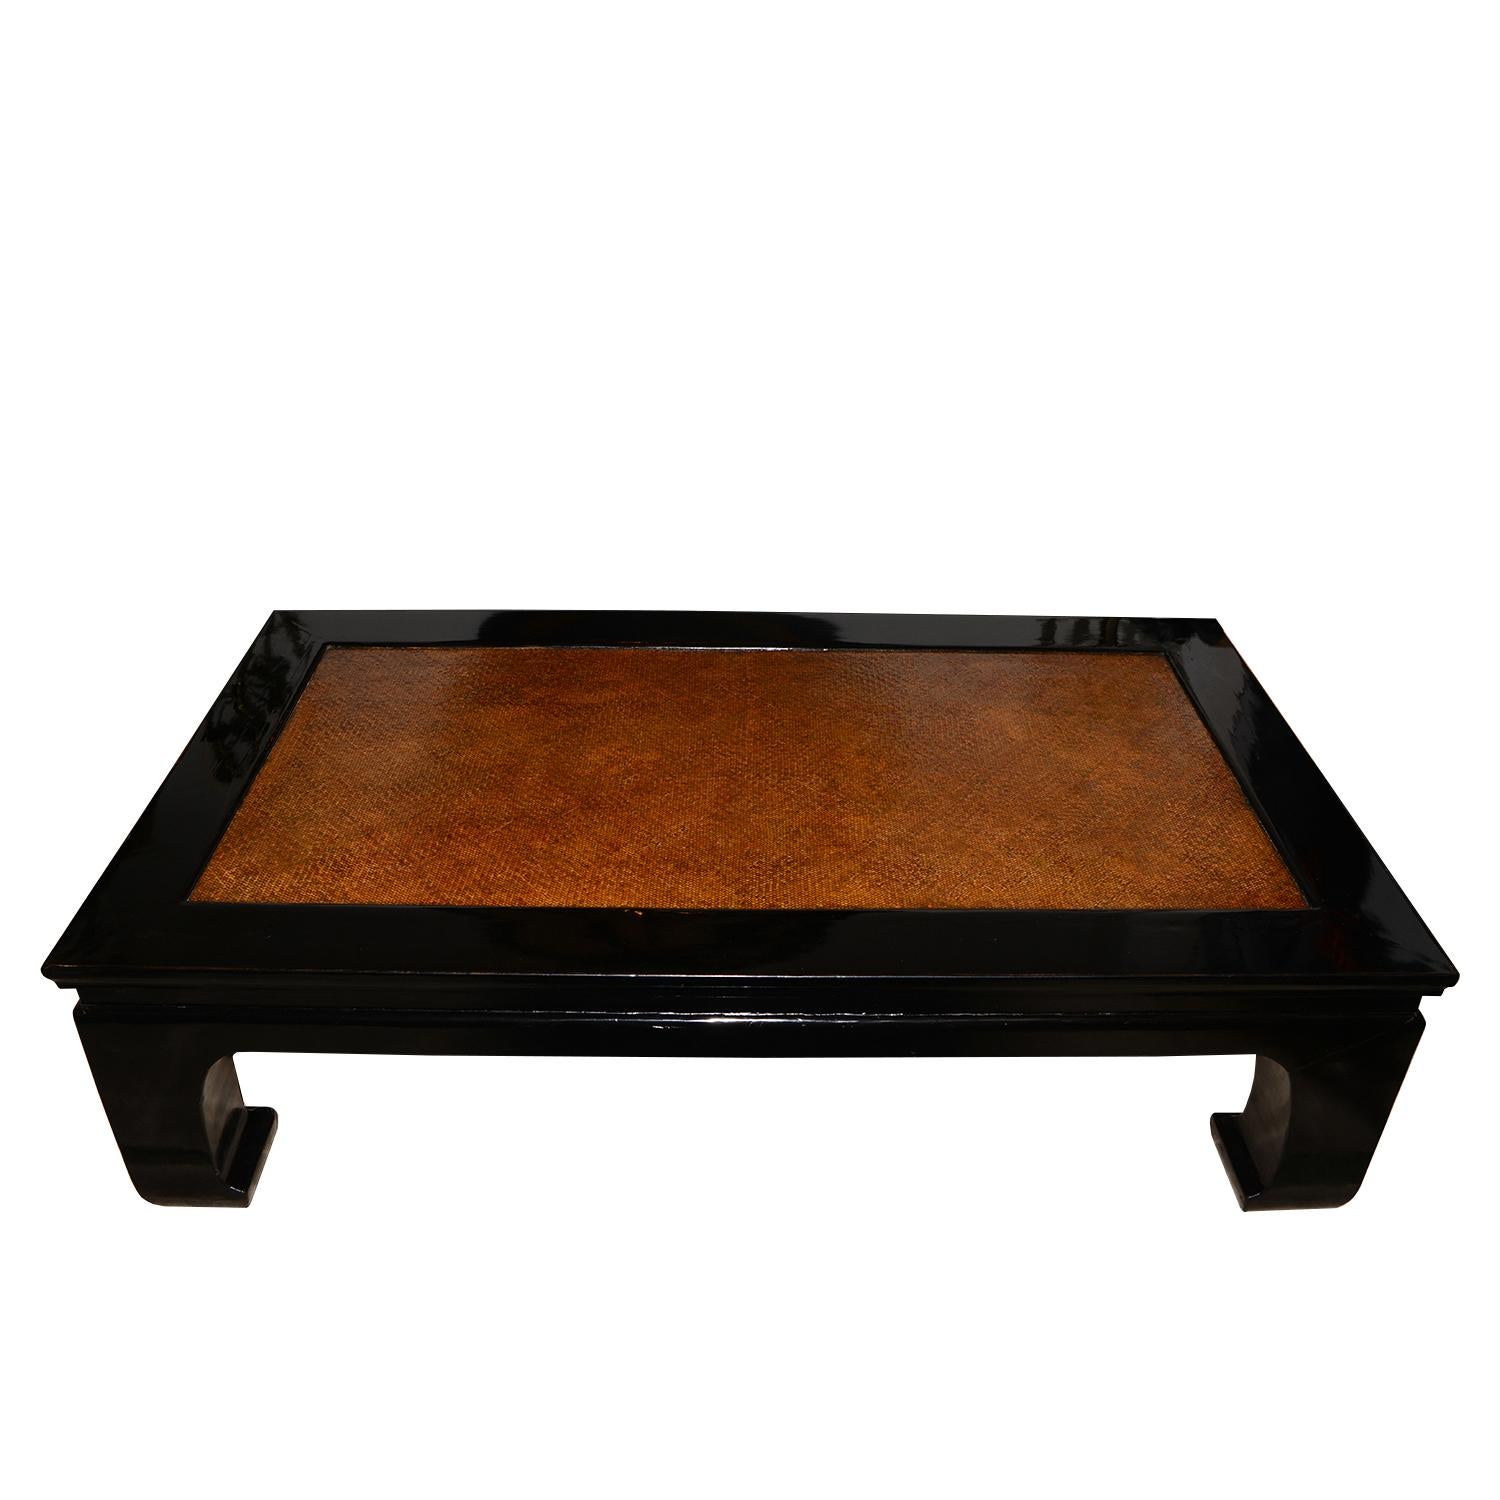 Coffee Table Opium Daybed with structure in solid elm in stained
moka finish and in lacquered finish, table top in hand-crafted cane
with lacquered finish. Exceptional and unique piece.